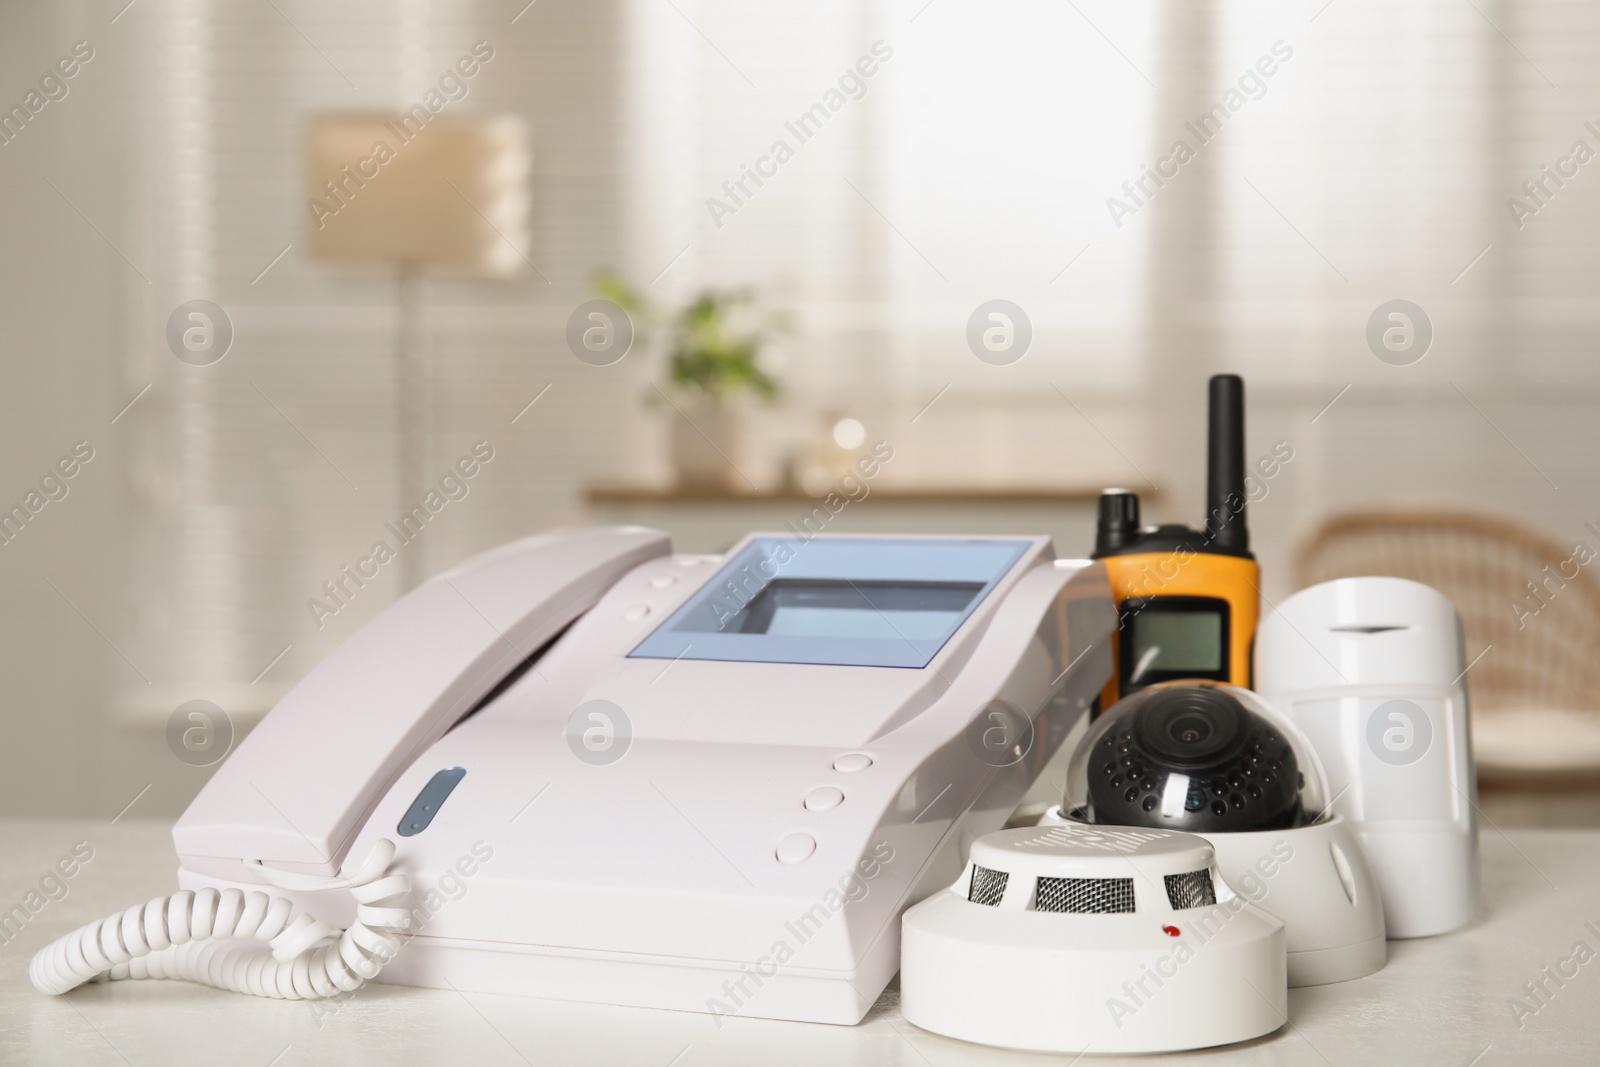 Photo of Intercom, CCTV camera, walkie talkie, smoke and movement detectors on white table indoors. Home security system